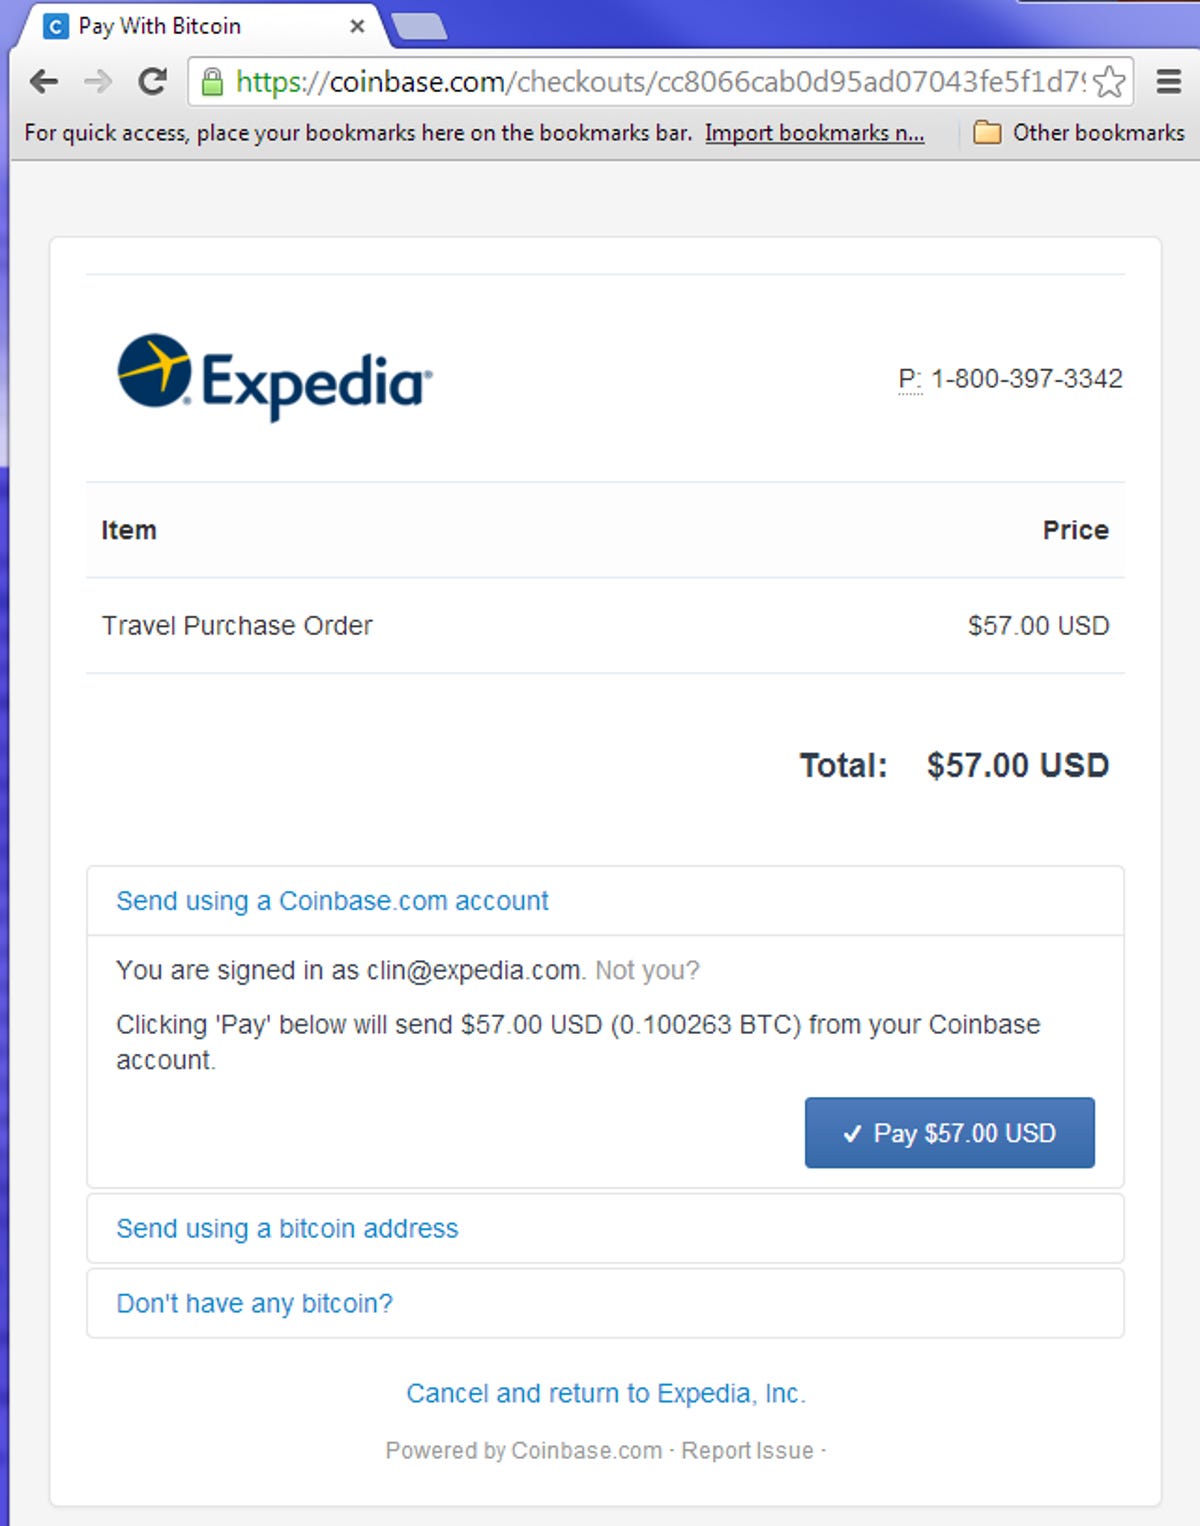 Expedia uses Coinbase's service to fulfill bitcoin-based transactions.